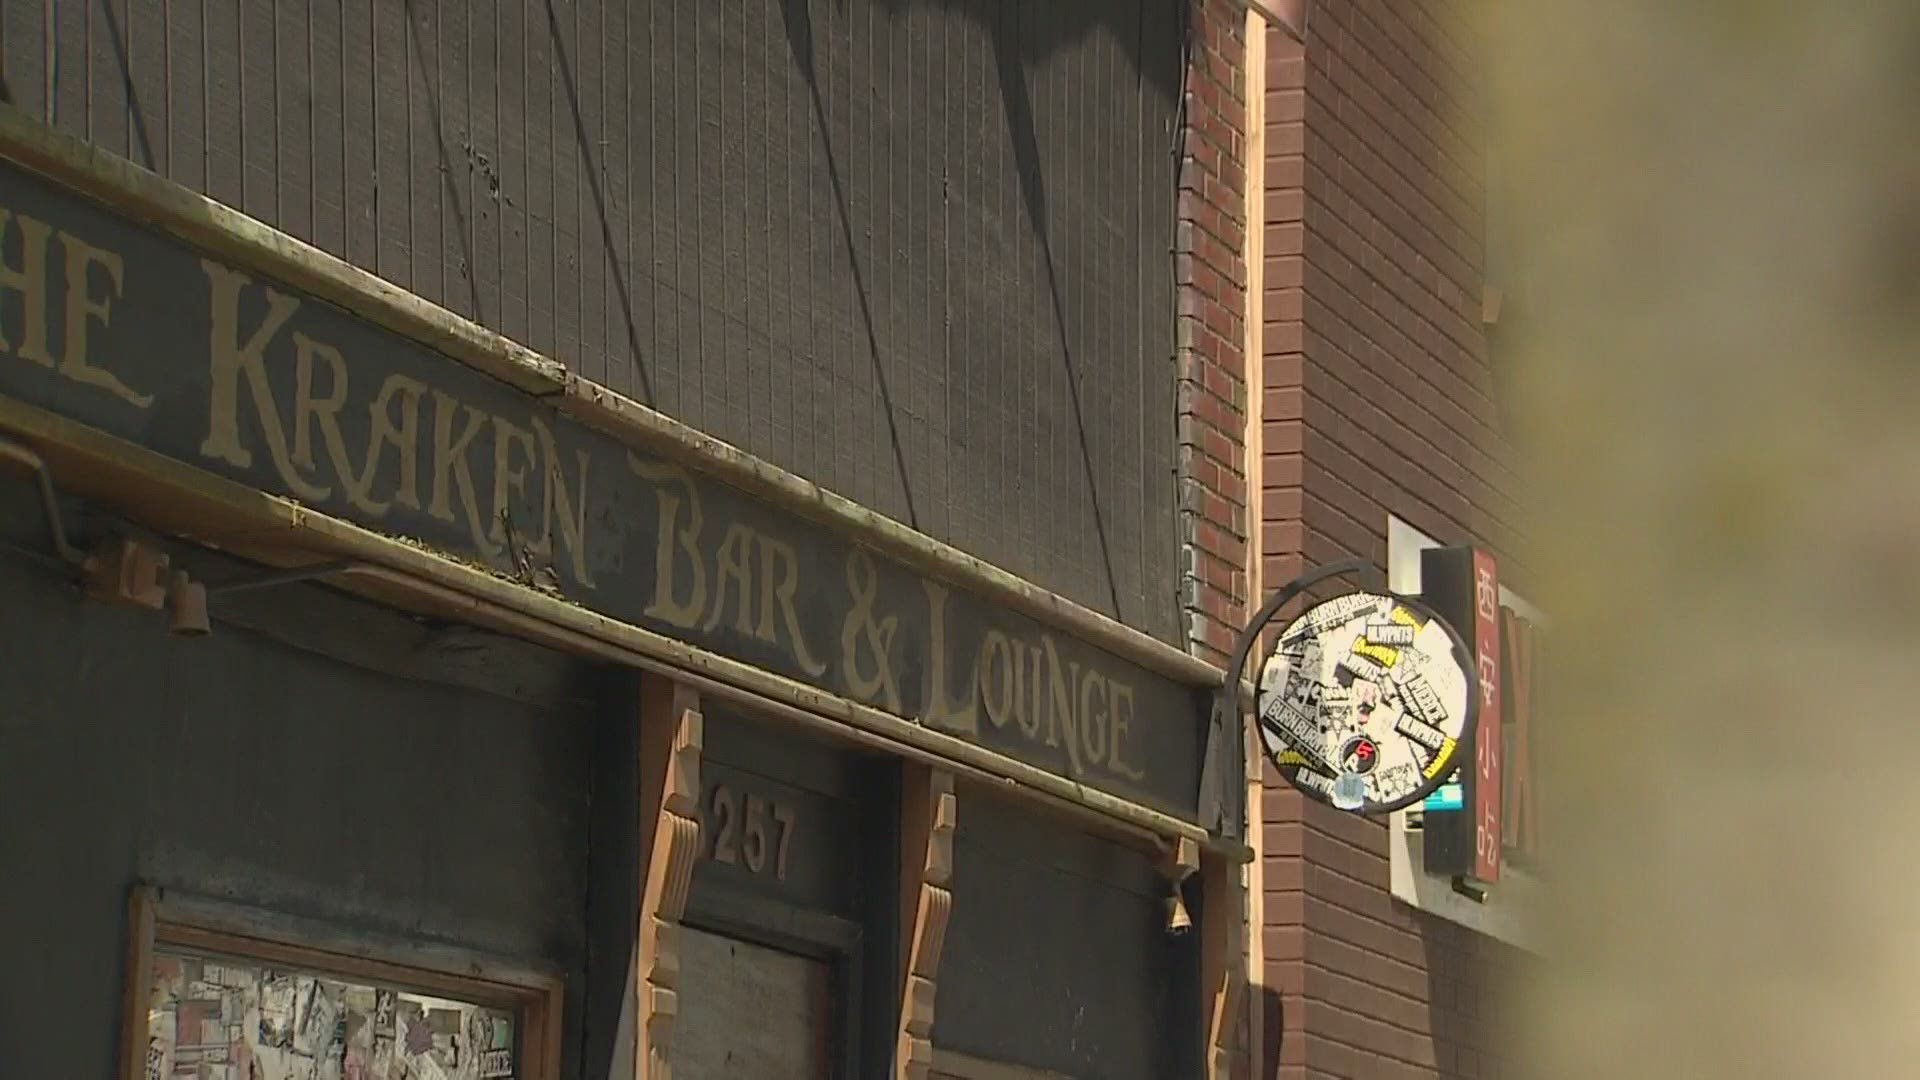 The bar's owners are asking the team to cease using the name "The Kraken Bar and Grill" for their flagship restaurant and are seeking $3.5 million in damages.